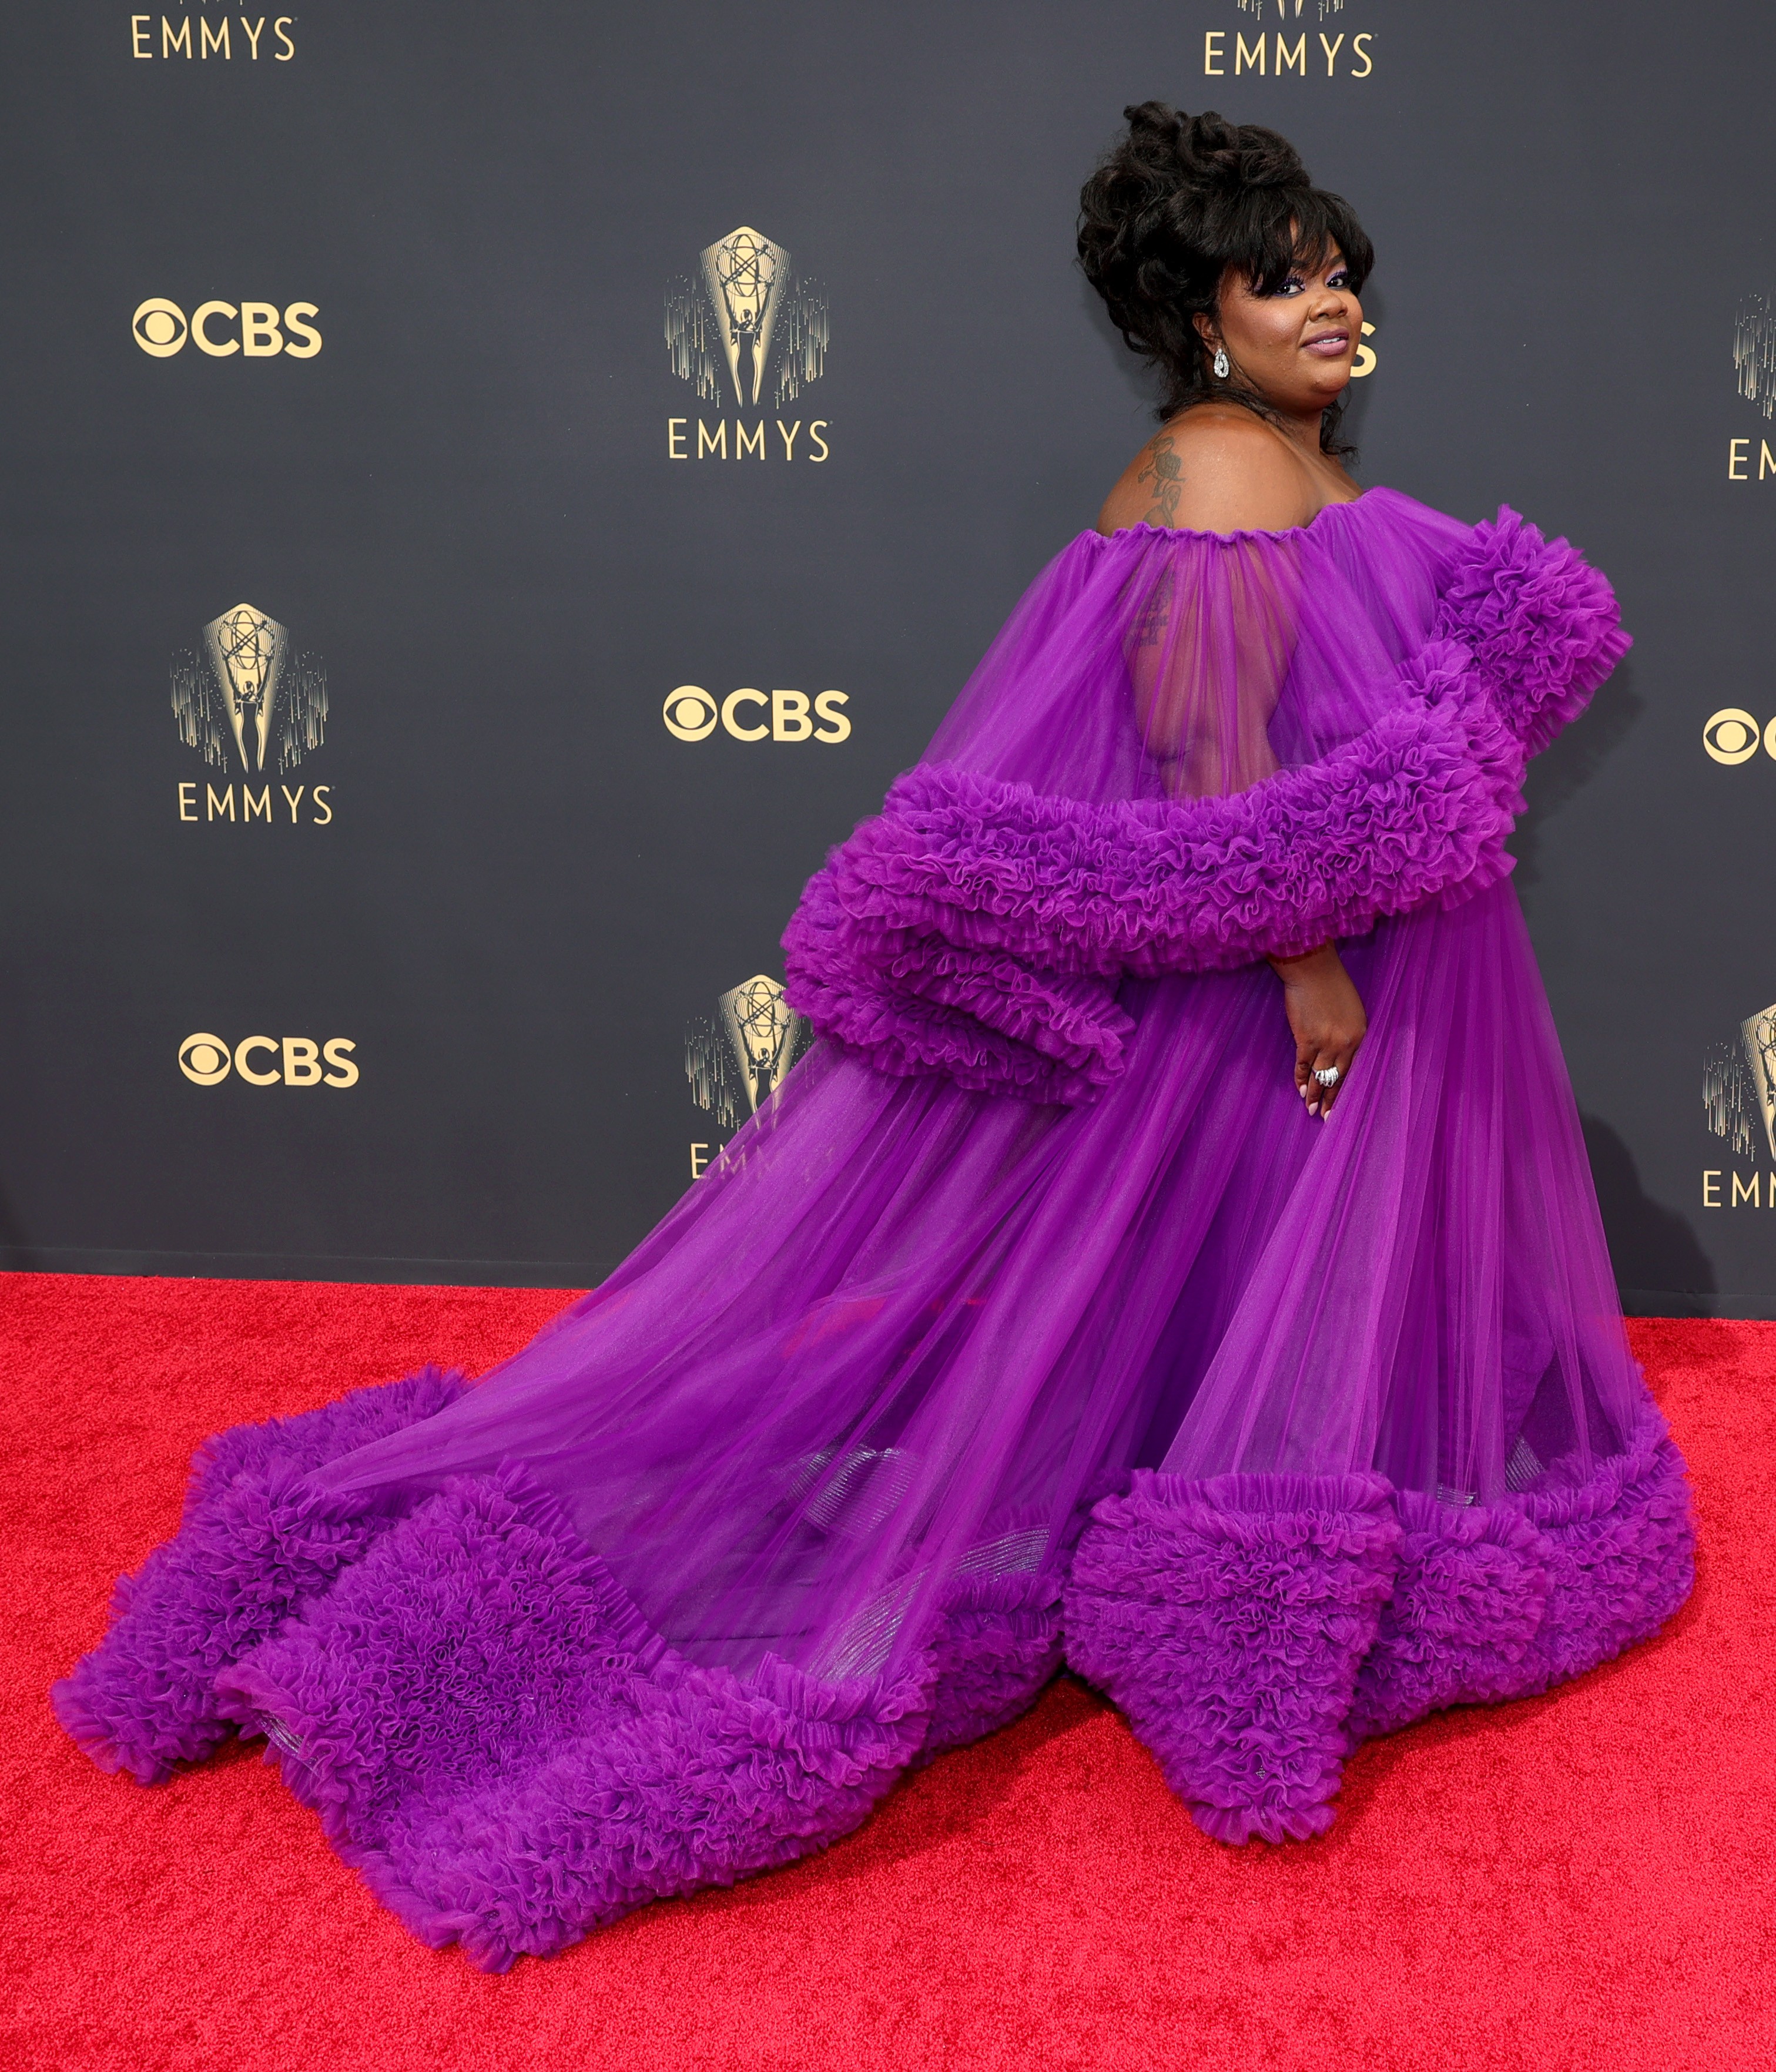 LOS ANGELES, CALIFORNIA - SEPTEMBER 19: Nicole Byer attends the 73rd Primetime Emmy Awards at L.A. LIVE on September 19, 2021 in Los Angeles, California. (Photo by Rich Fury/Getty Images) (Foto: Getty Images)